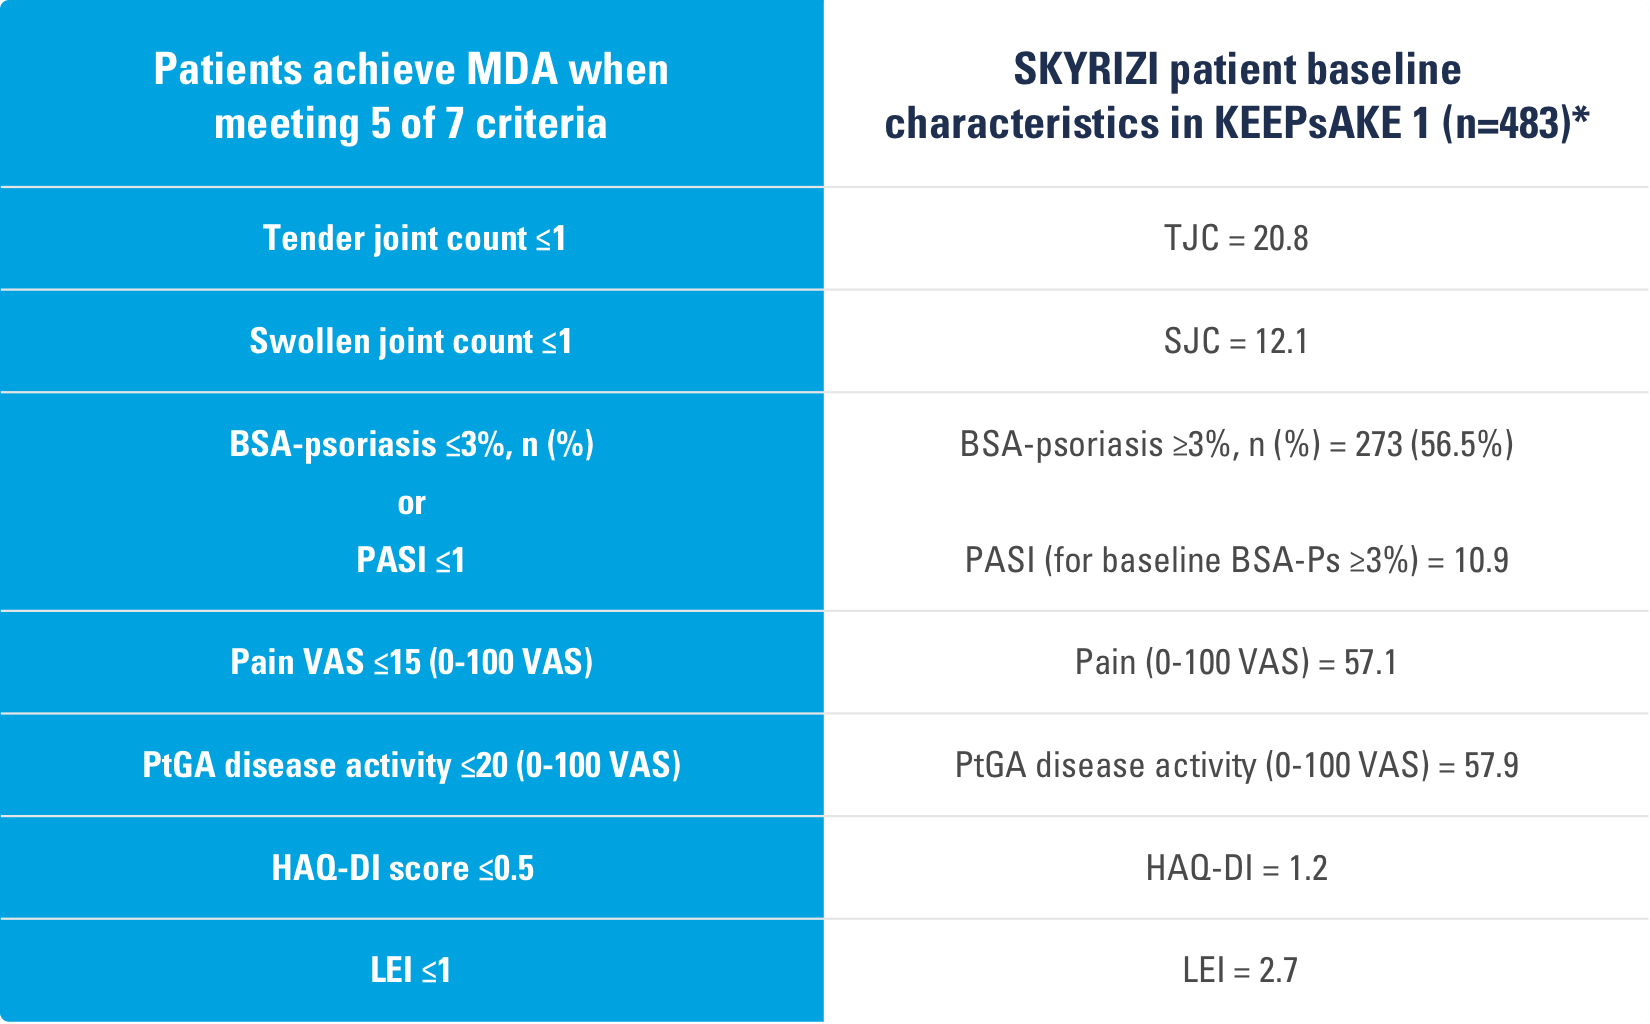 Patients achieve MDA when meeting 5 of 7 criteria: Tender joint count <1, Swollen join count <1, BSA‐psoriasis <3% or PASI <1, Pain VAS <15, PtGA disease activity <20, HAQ‐DI score <0.5, and LEI <1.